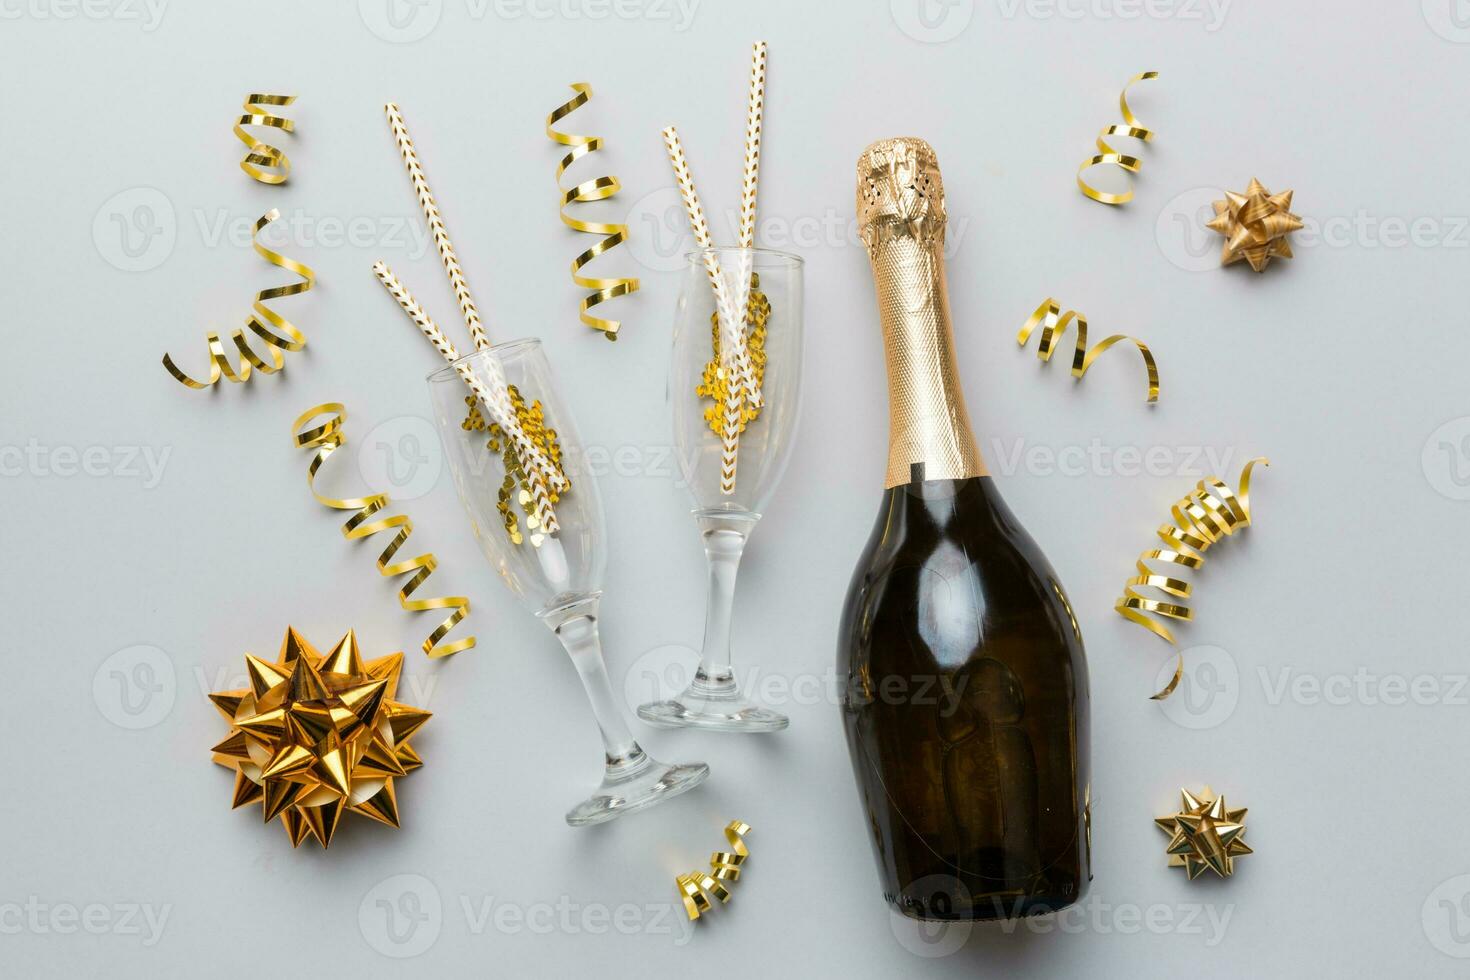 bottle of champagne with glasses and colorful confetti on colored background. top view flay lay photo